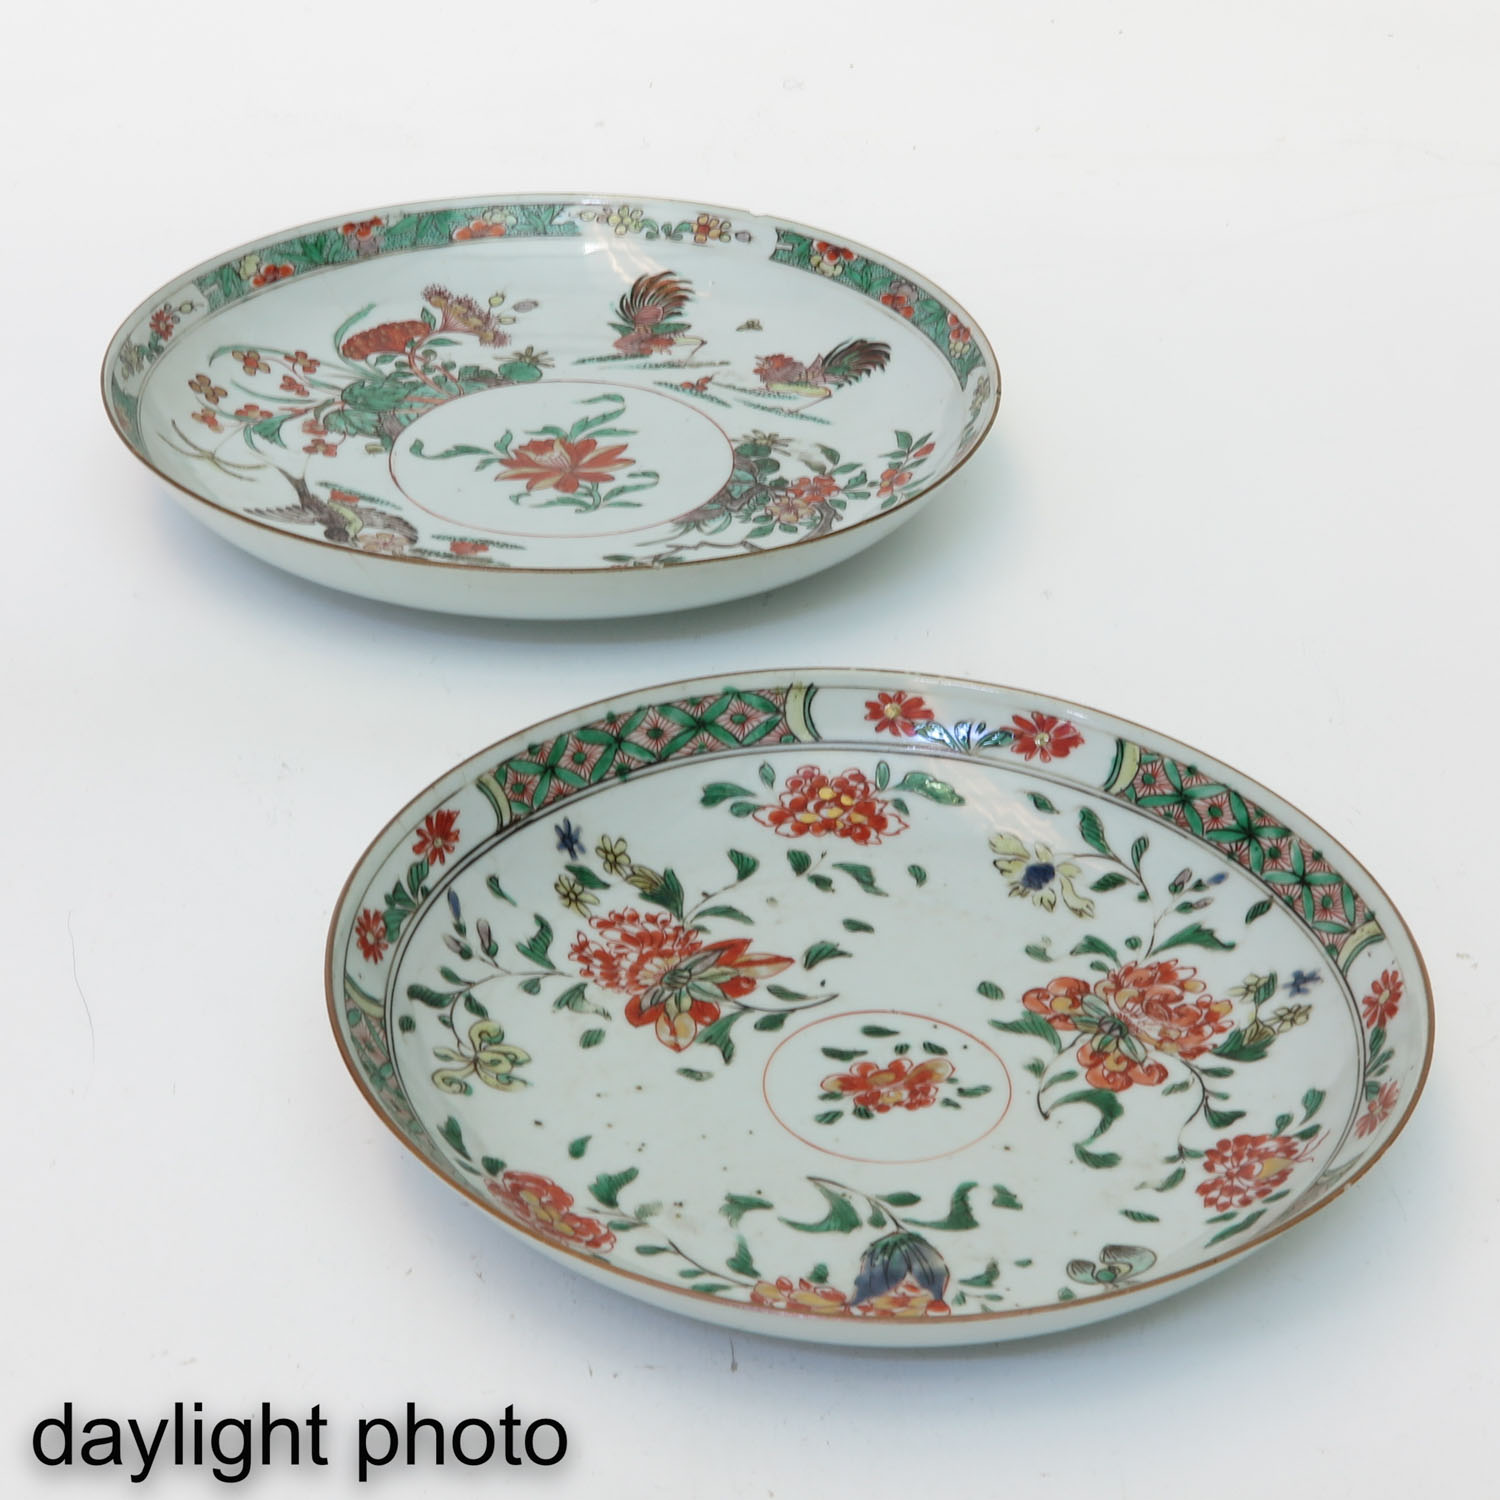 A Lot of 2 Famille Verte Plates - Image 7 of 10